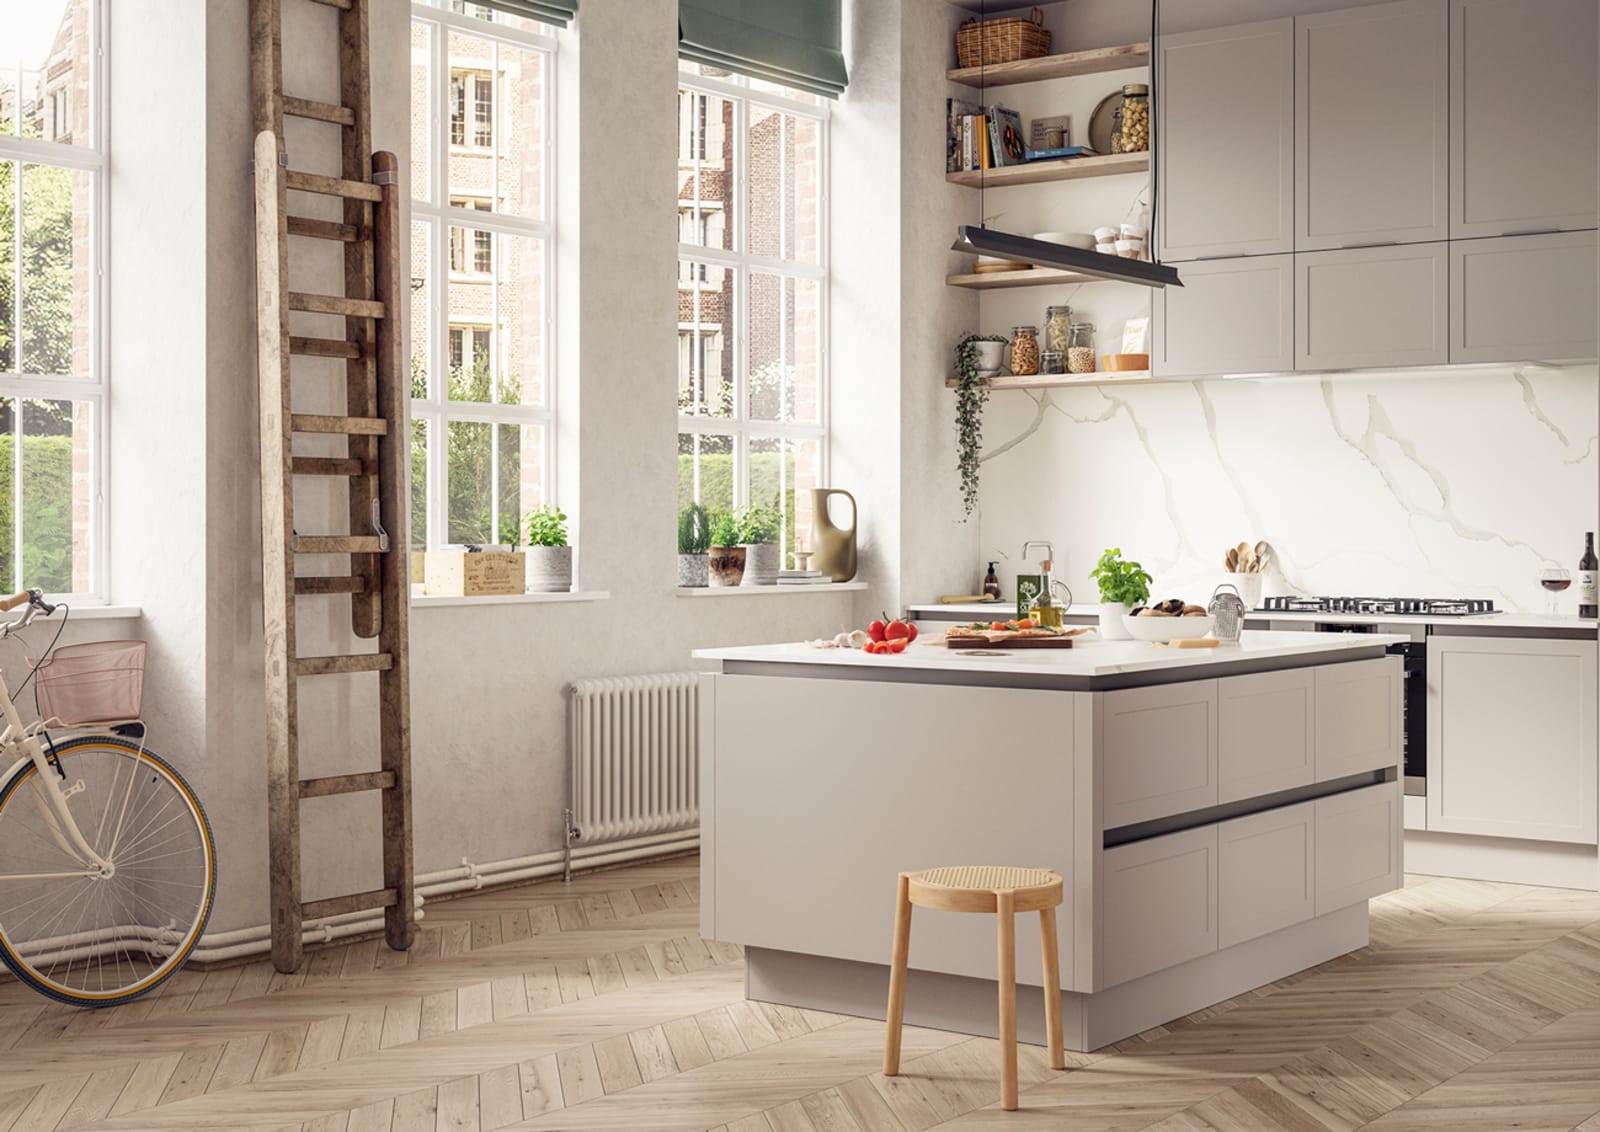 Integra Dunham Kitchen by Magnet. Premium painted matt finish with unique door style available in 20 colours.